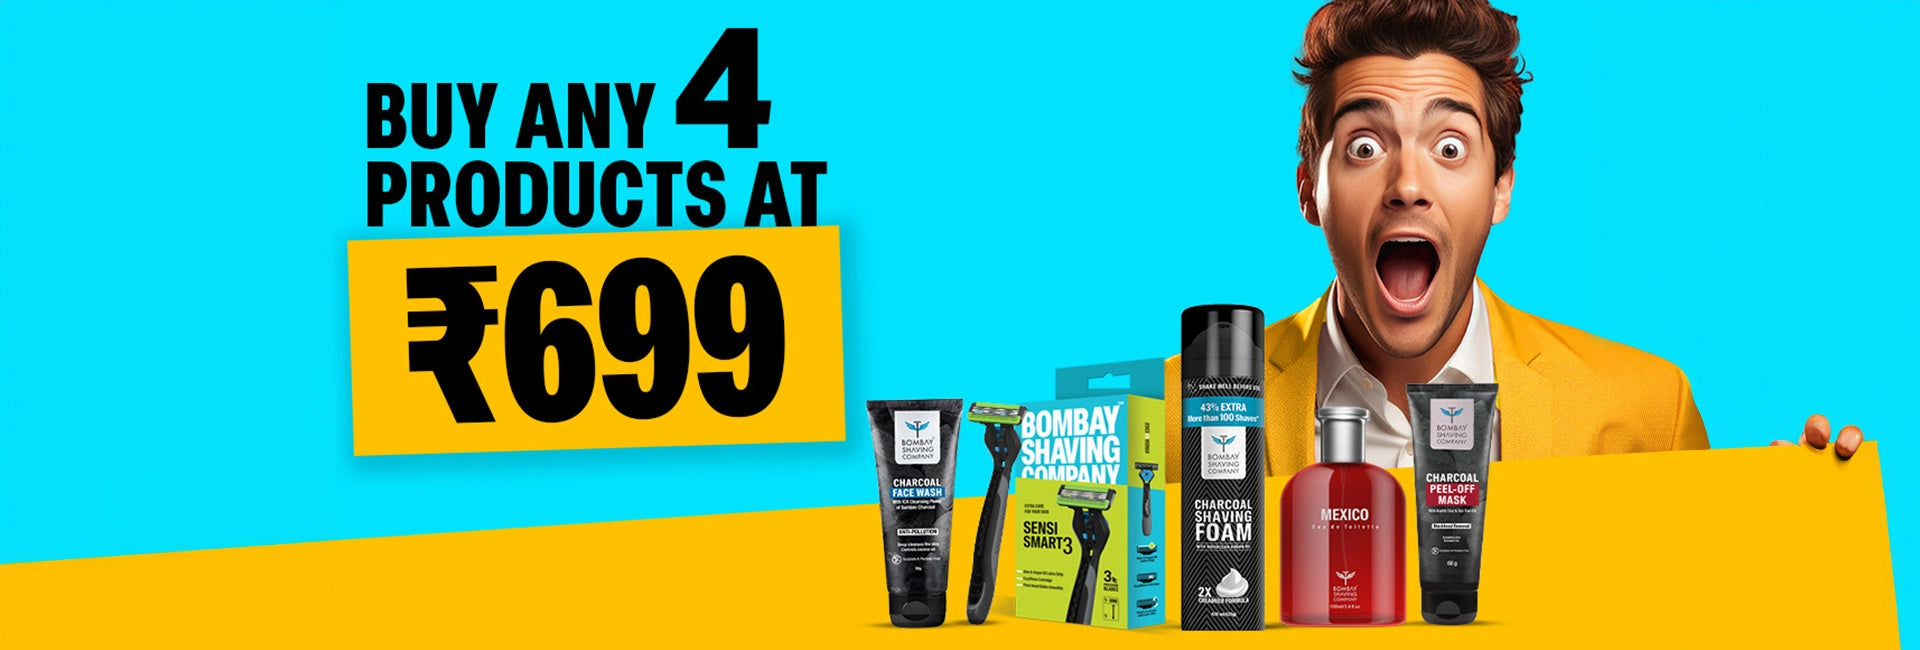 Buy any 4 products at 699